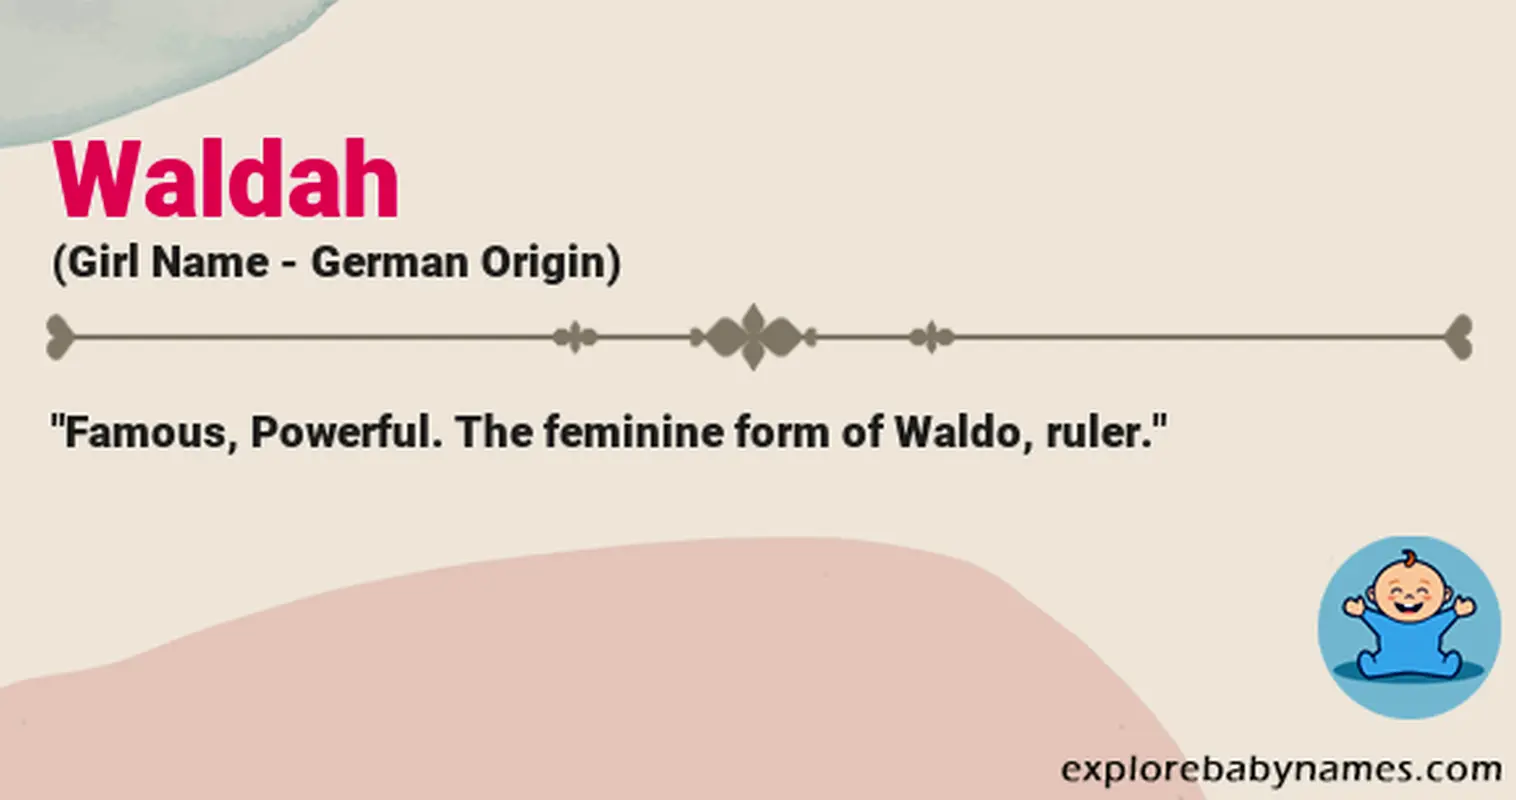 Meaning of Waldah